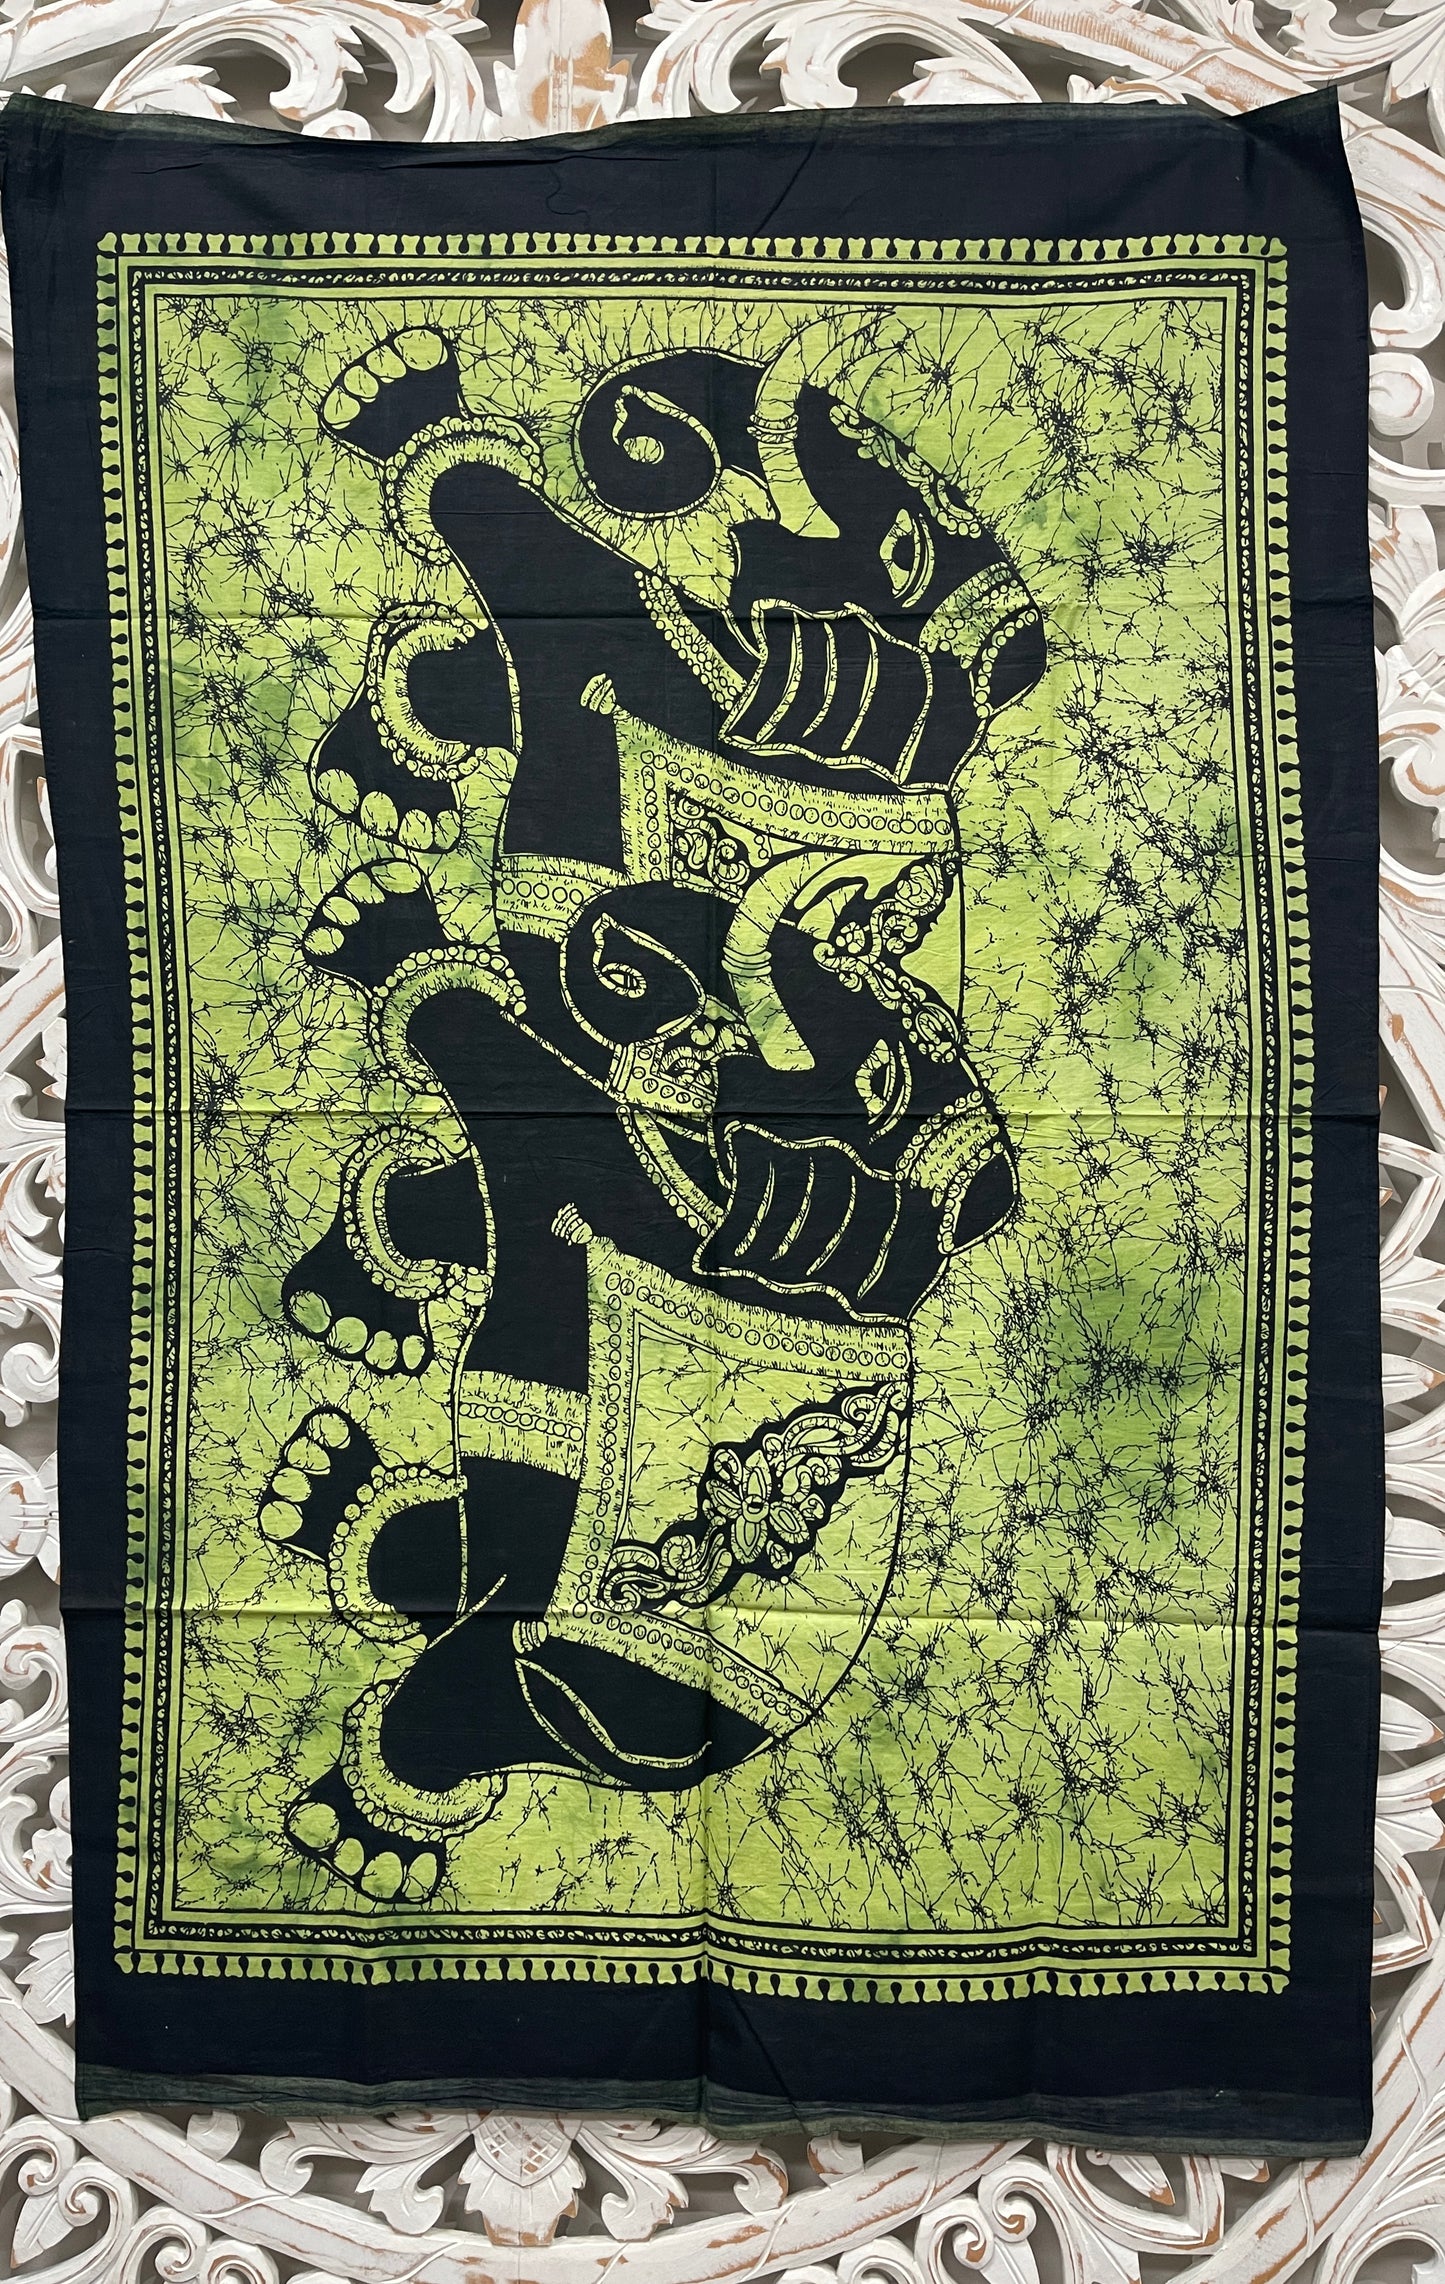 Hand printed Fabric Poster Elephant Tapestries Wall Hangings - 4 colors